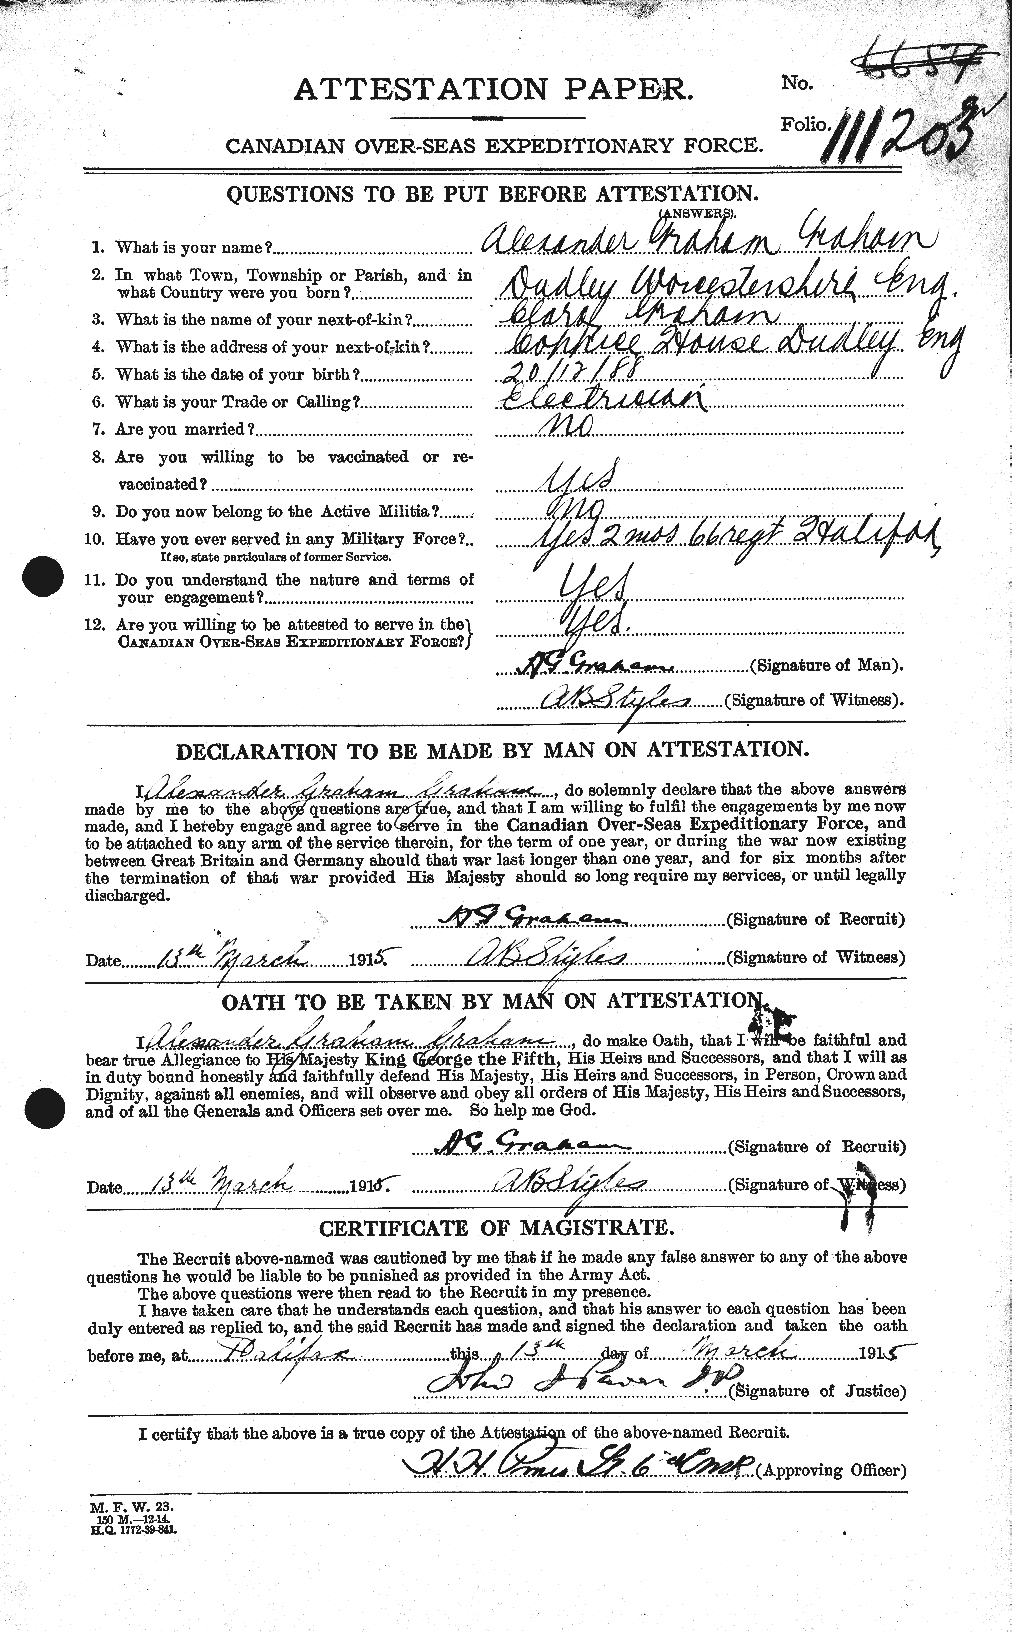 Personnel Records of the First World War - CEF 359586a